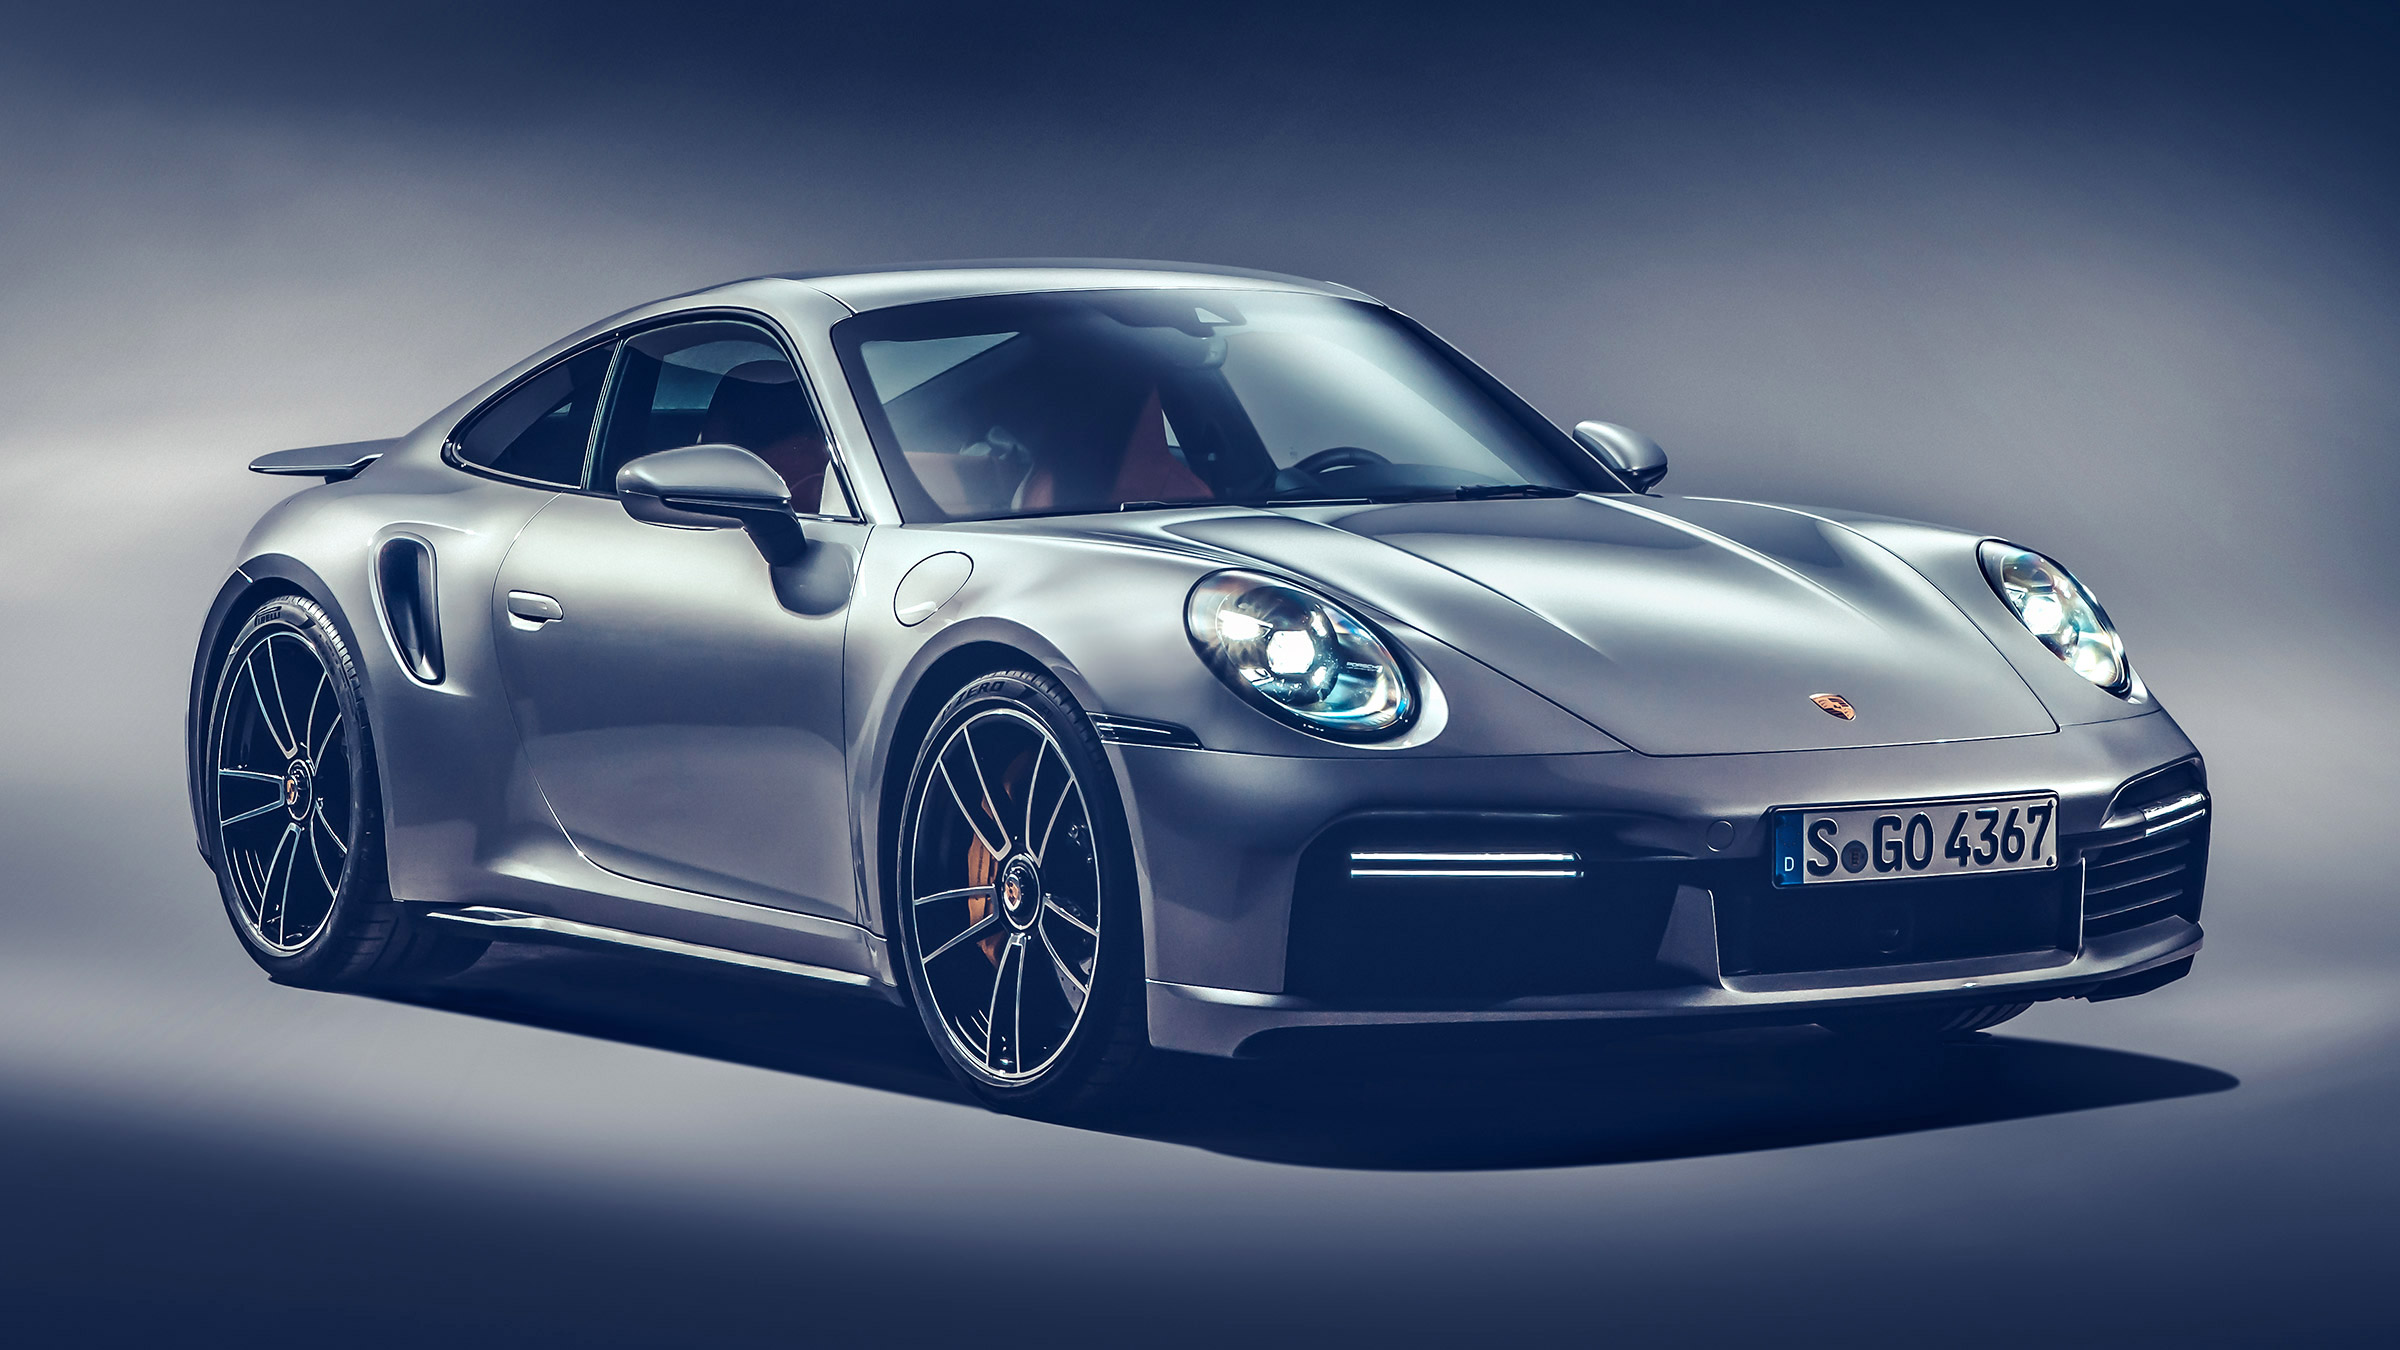 New Porsche 911 Turbo S unleashed with 641bhp and 205mph top speed